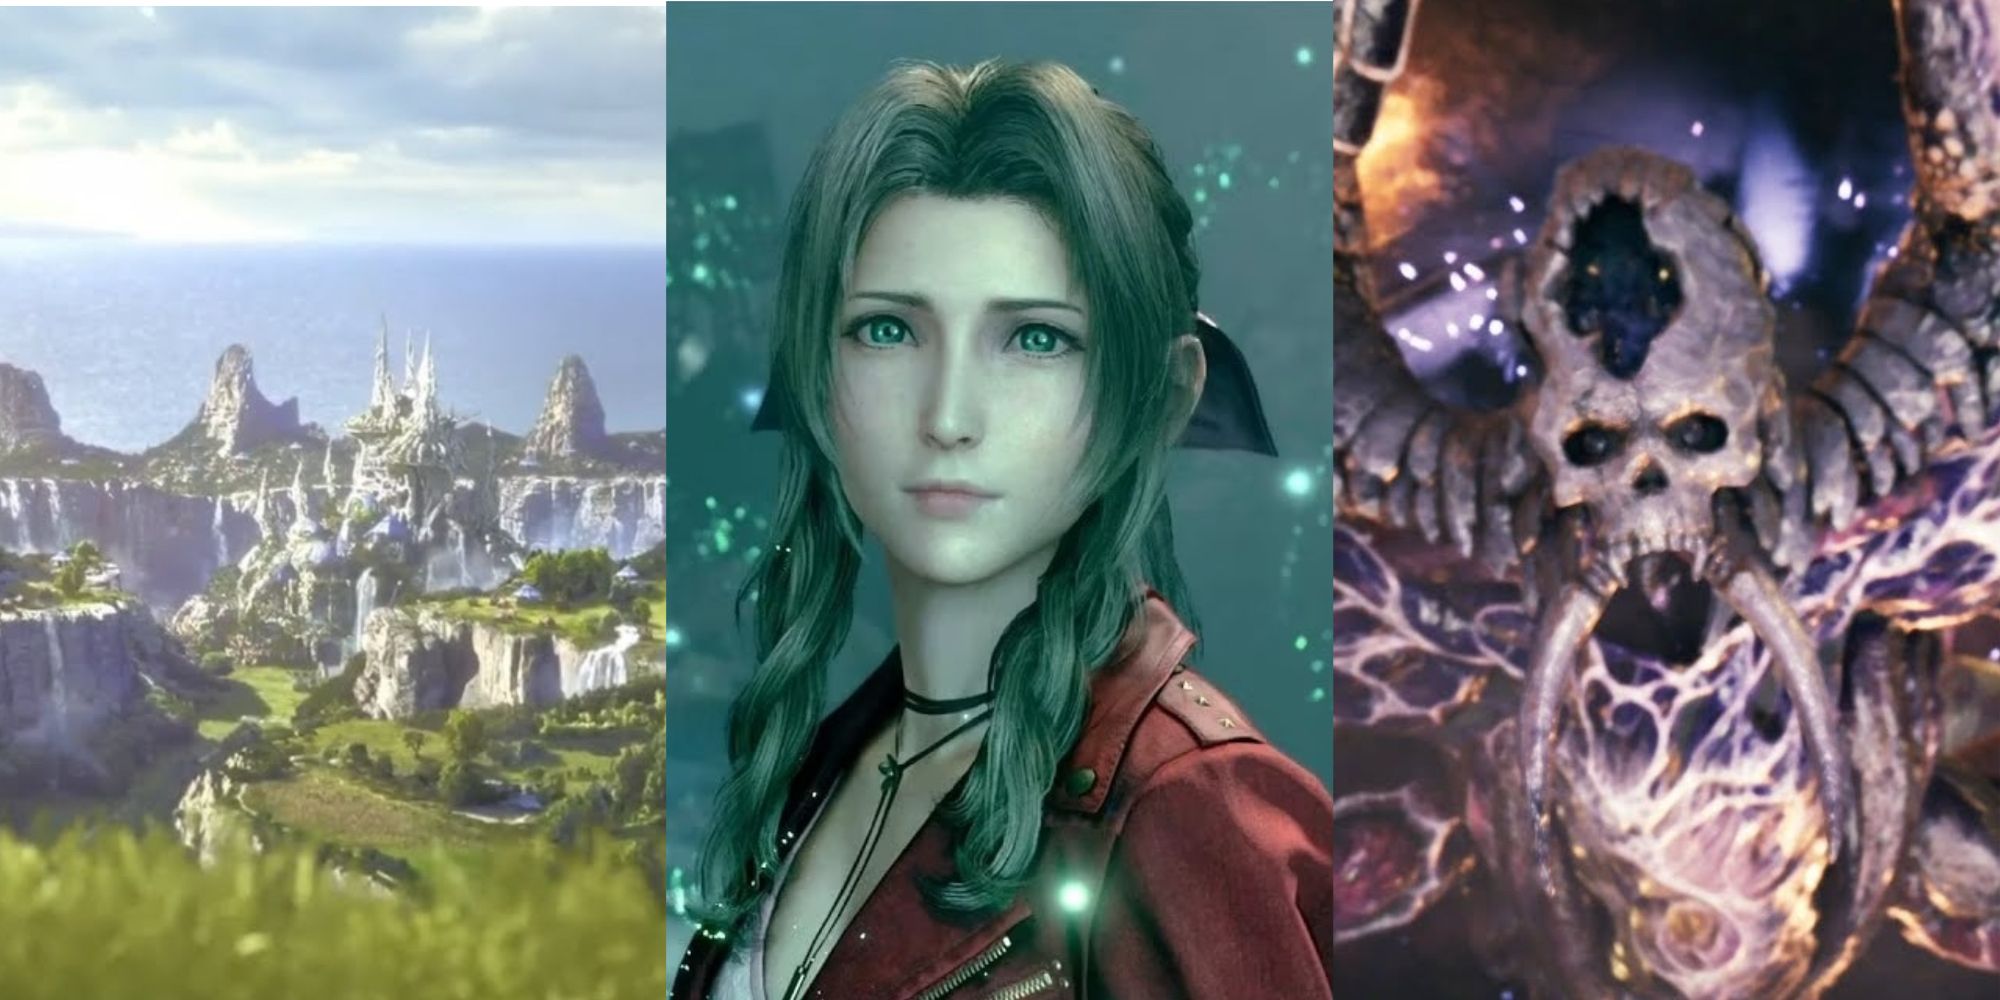 Split image from the world of Final Fantasy 7 showing the Cetra's homeland, Aerith, and Jenova